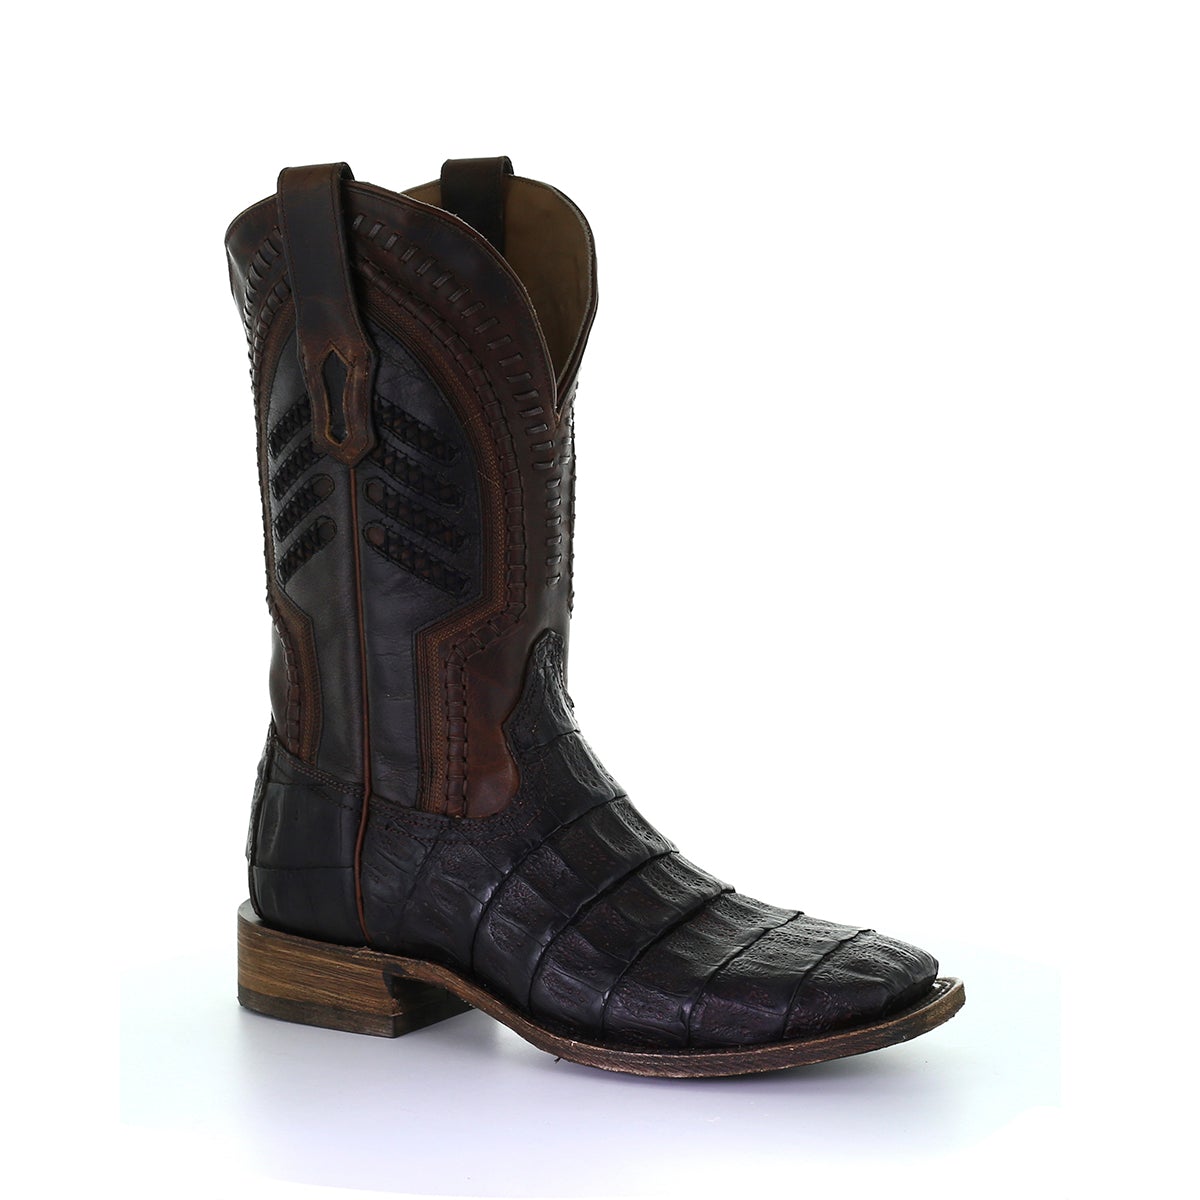 A3878 - MN OIL BROWN CAIMAN EMBROIDERY & WOVEN SHAFT SQ. TOE-kuet